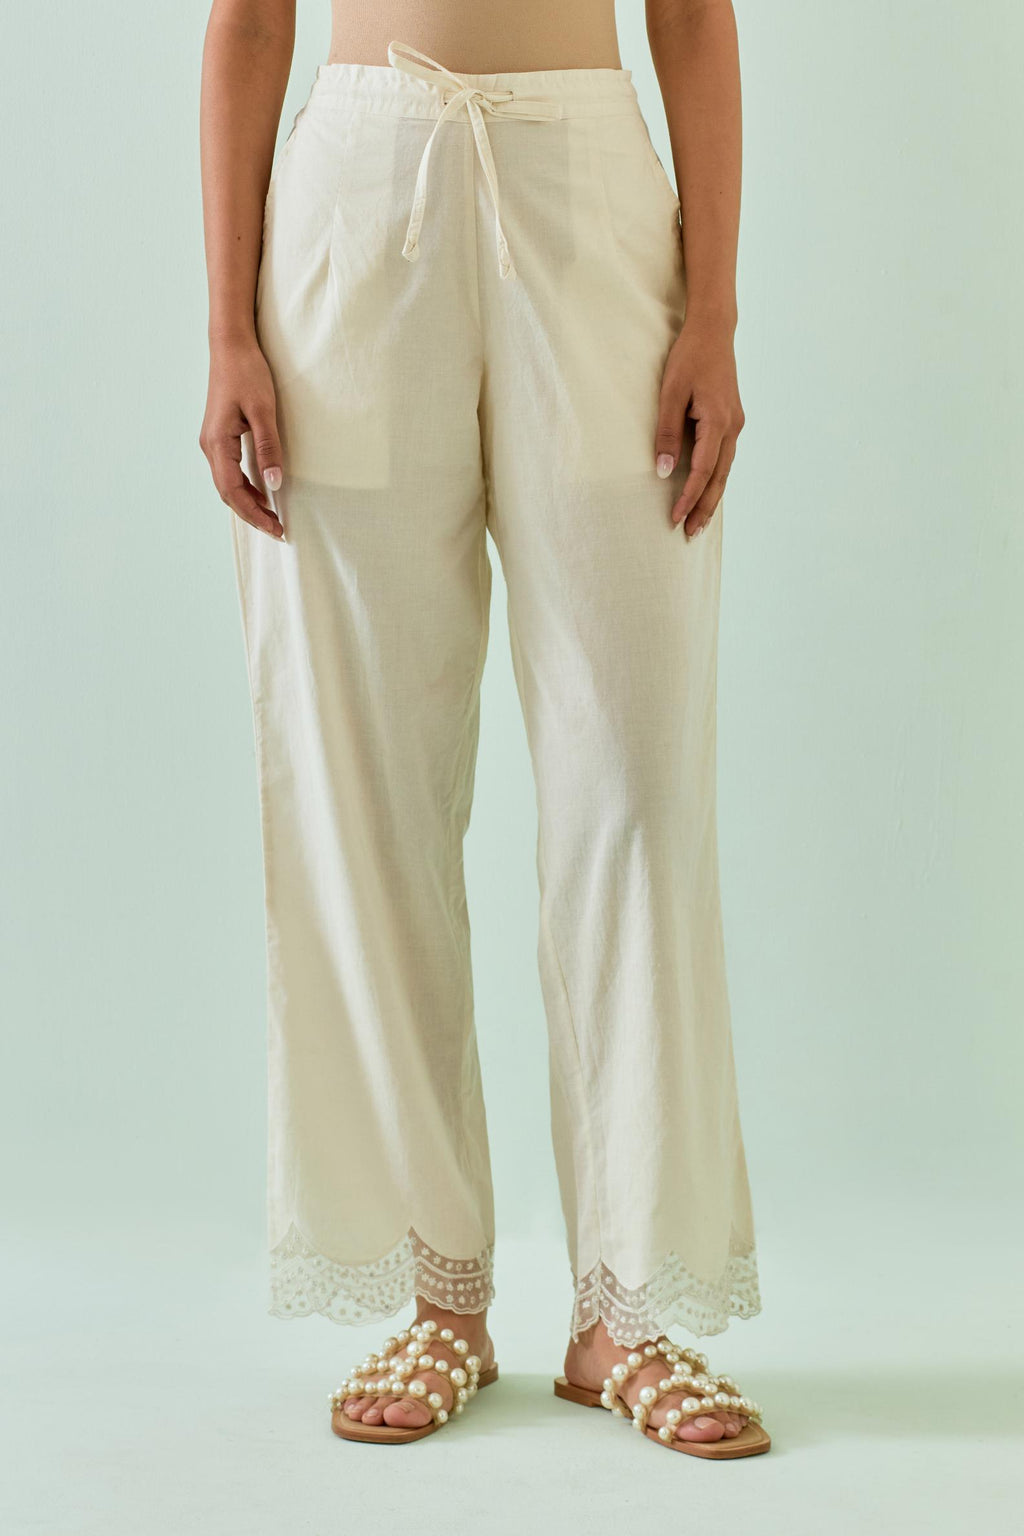 Off white straight pants with scalloped embroidery at bottom hem.